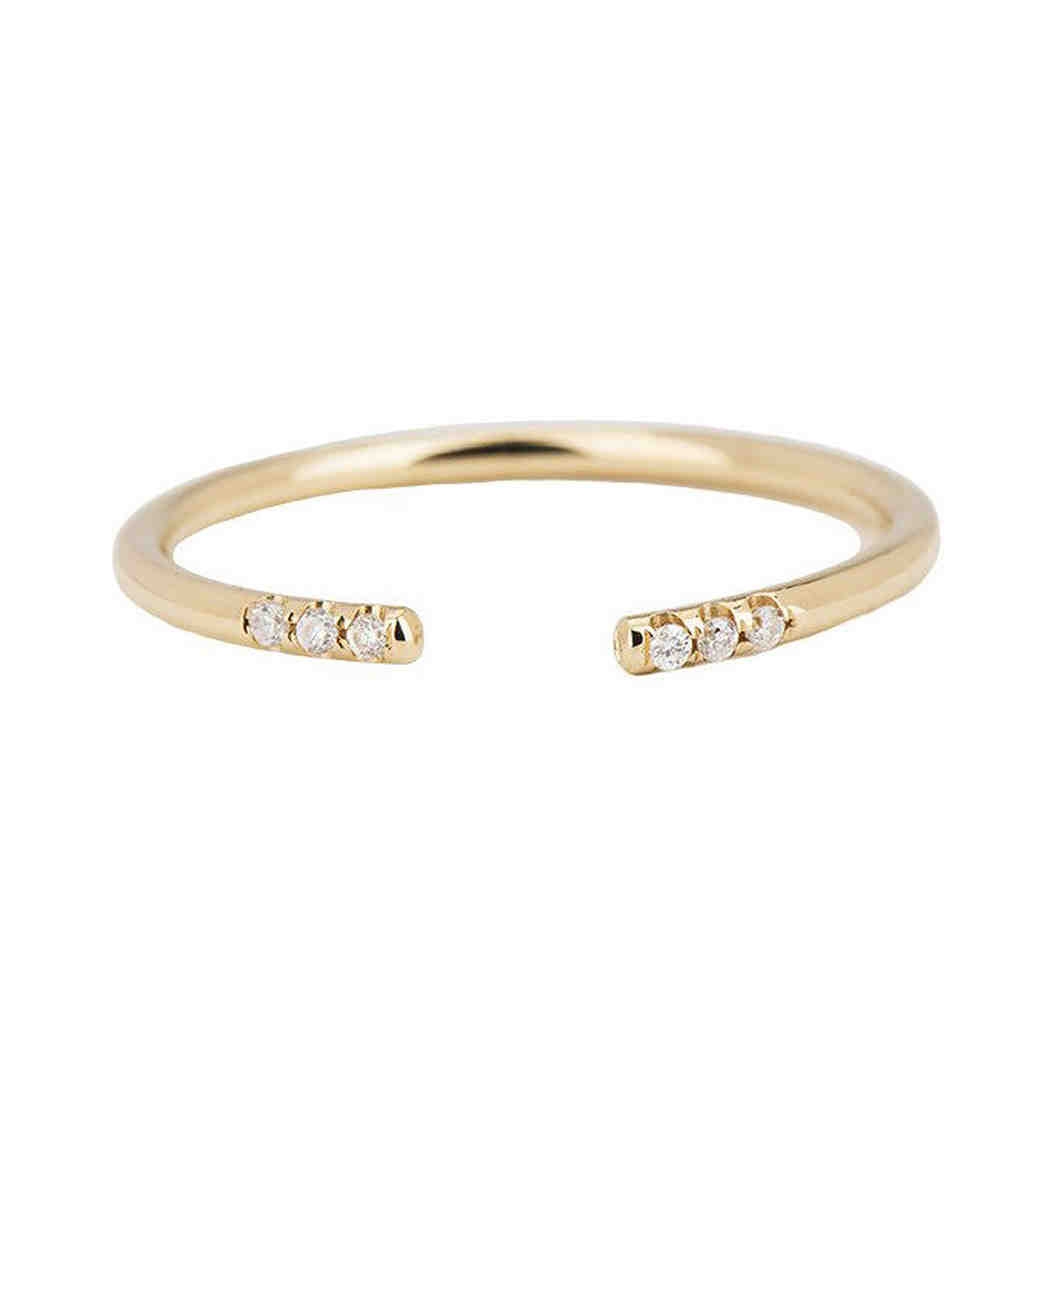 Wedding Bands That Pair Perfectly with Unique Engagement Rings | Martha ...